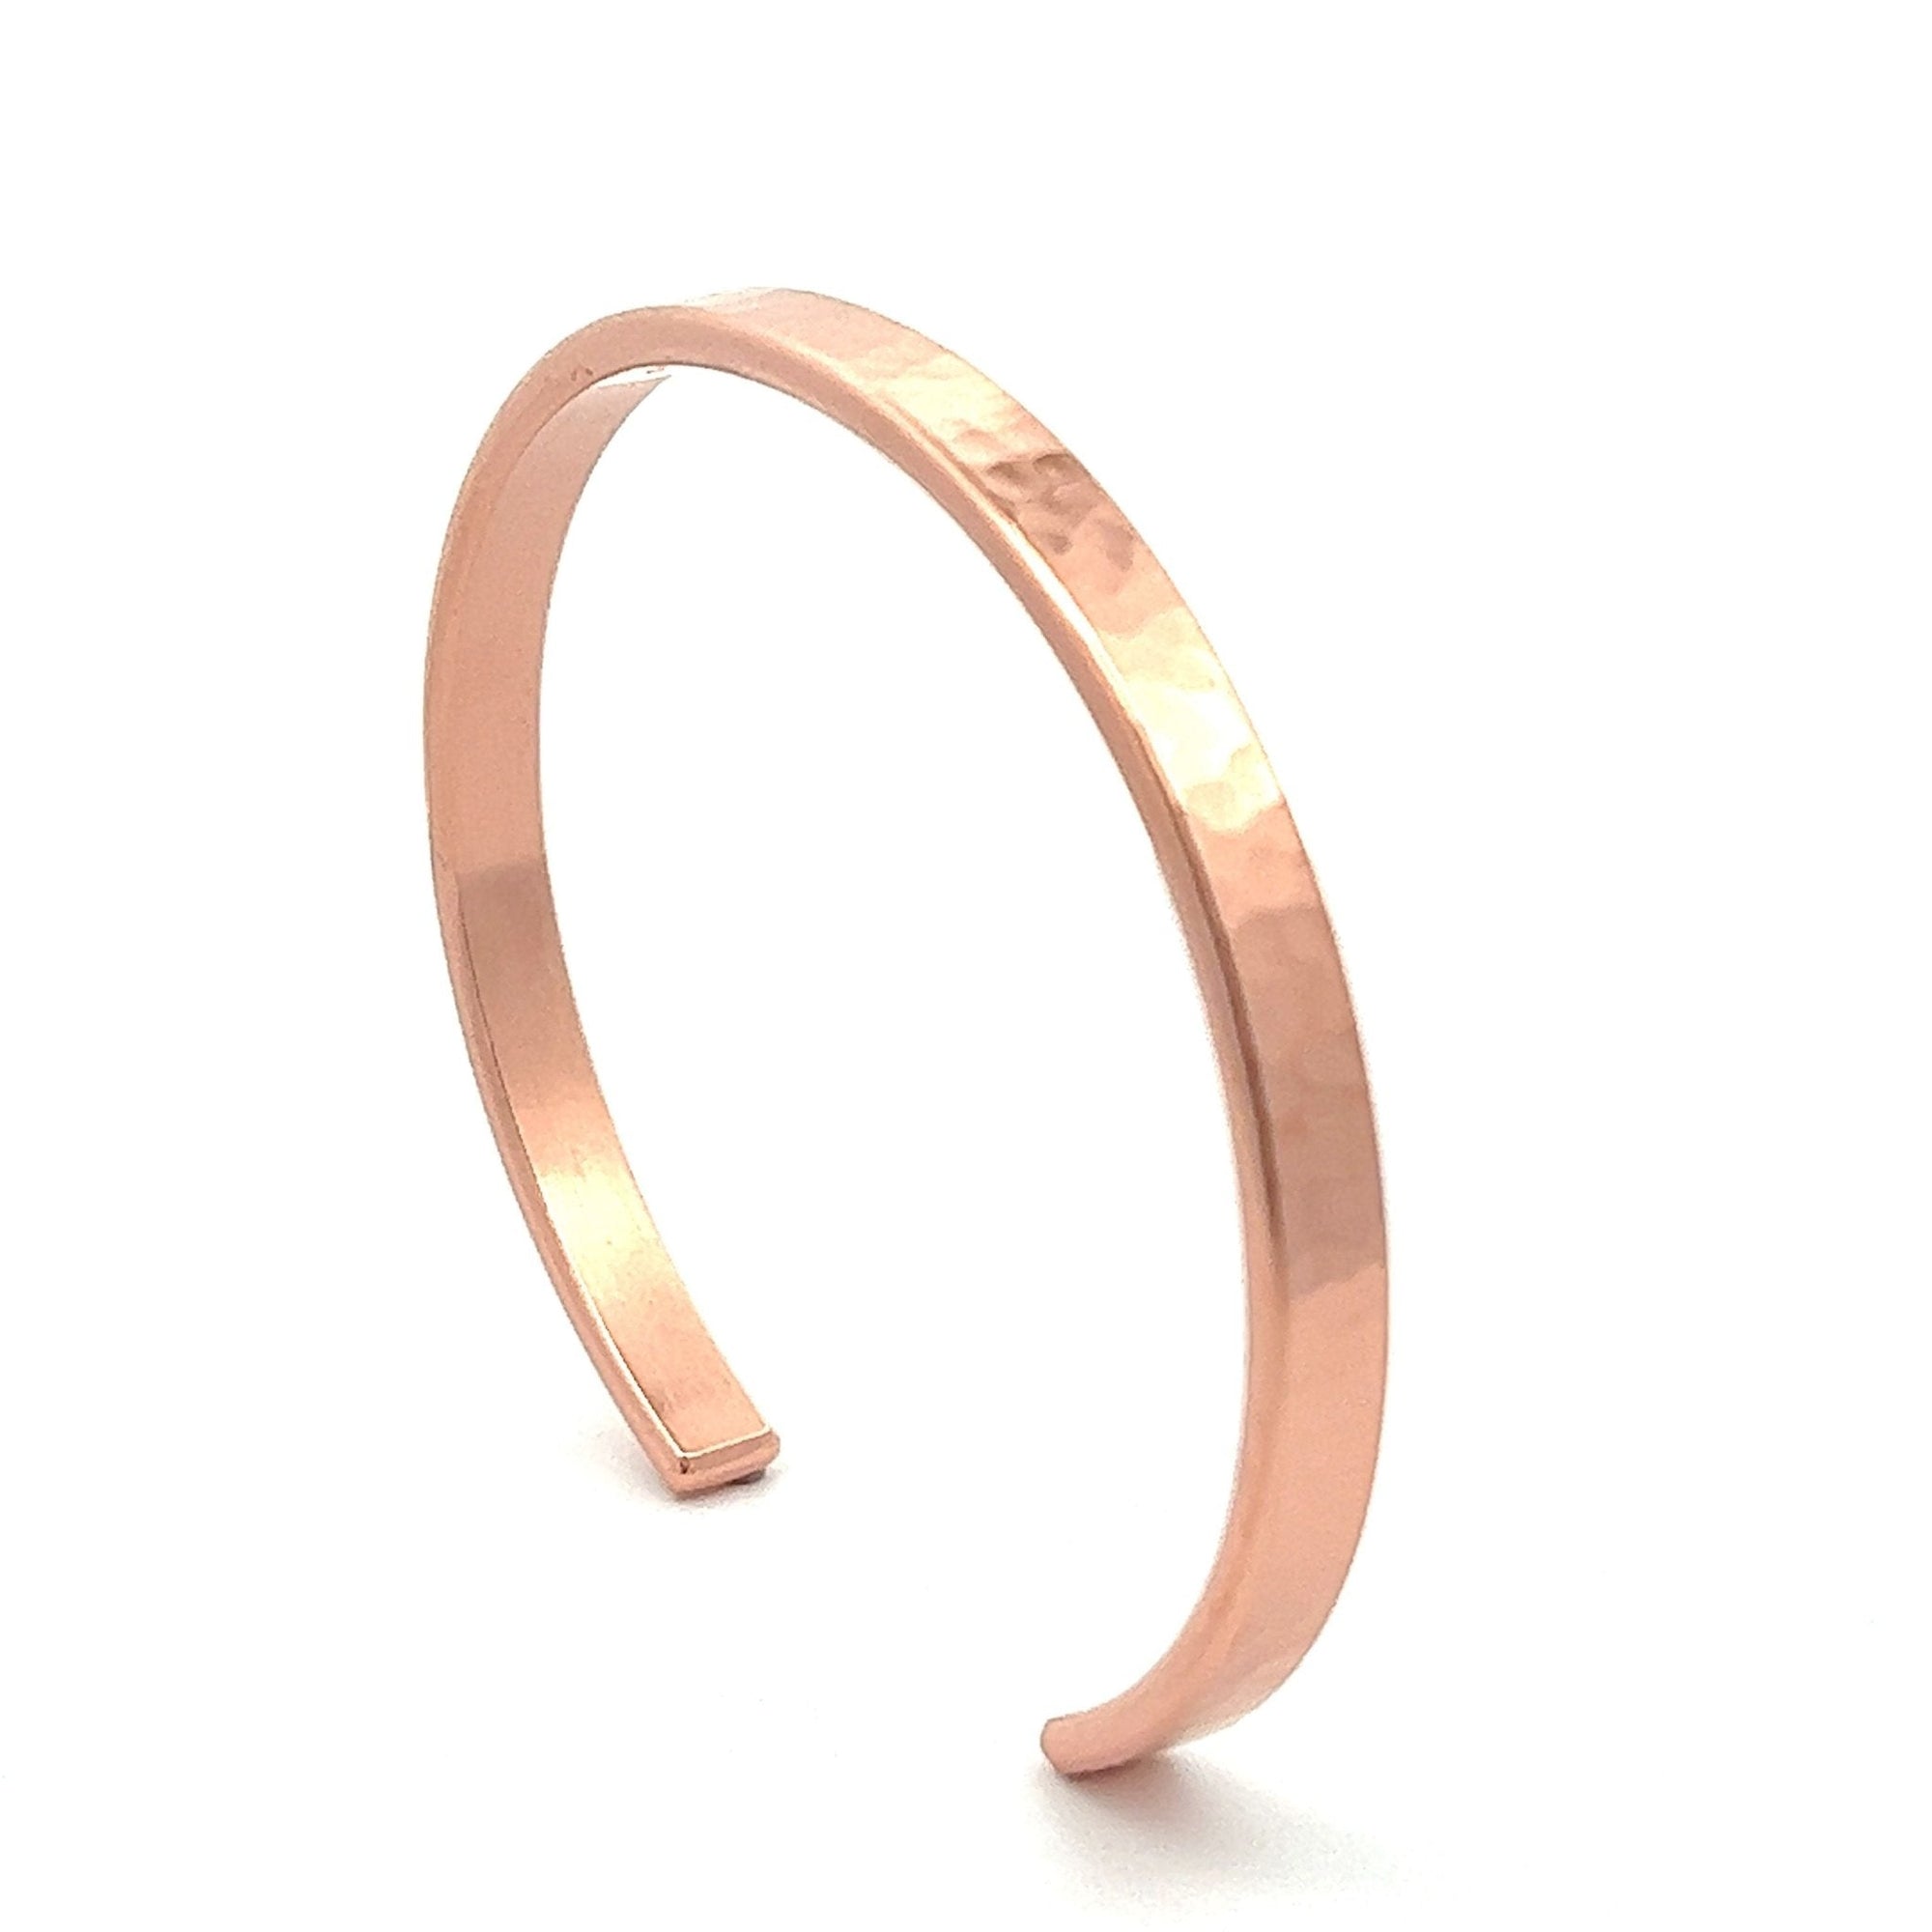 Size View of 4mm Wide Hammered Copper Cuff Bracelet